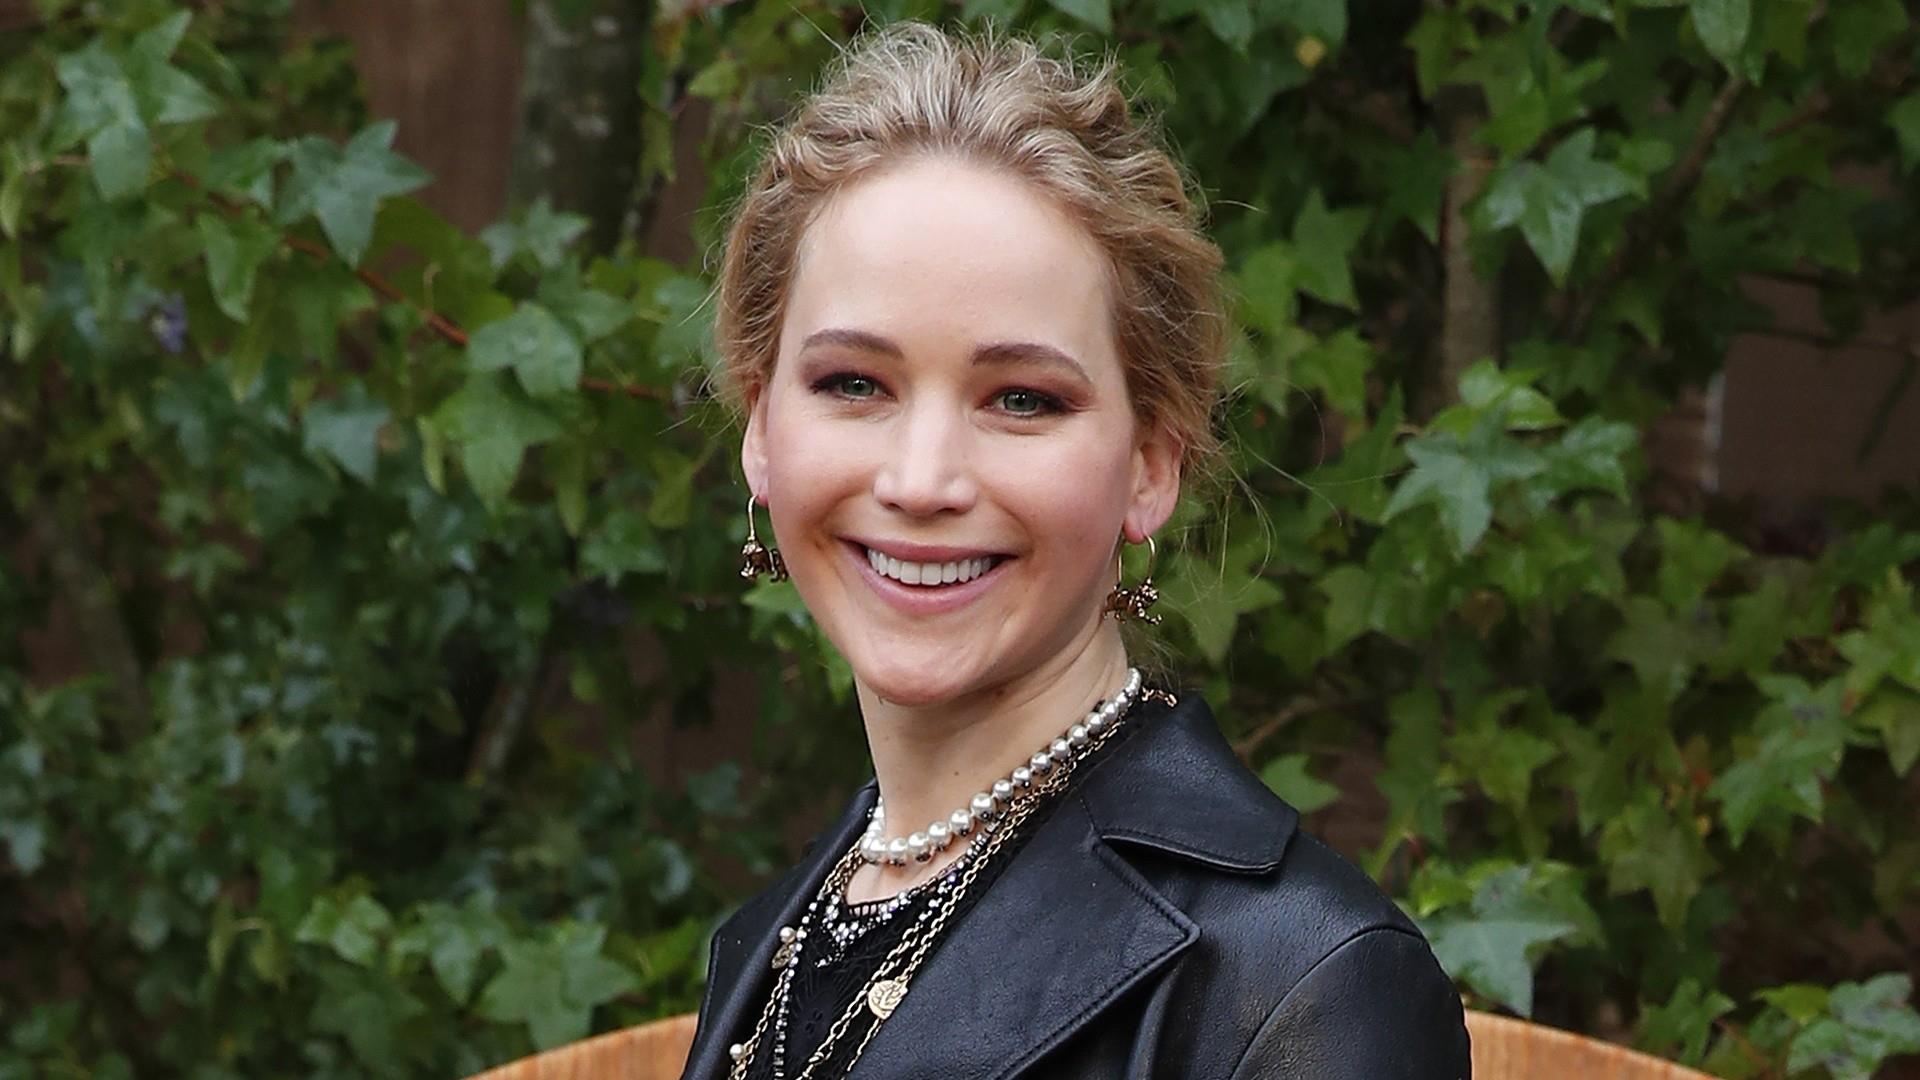 Jennifer Lawrence ties the knot: See